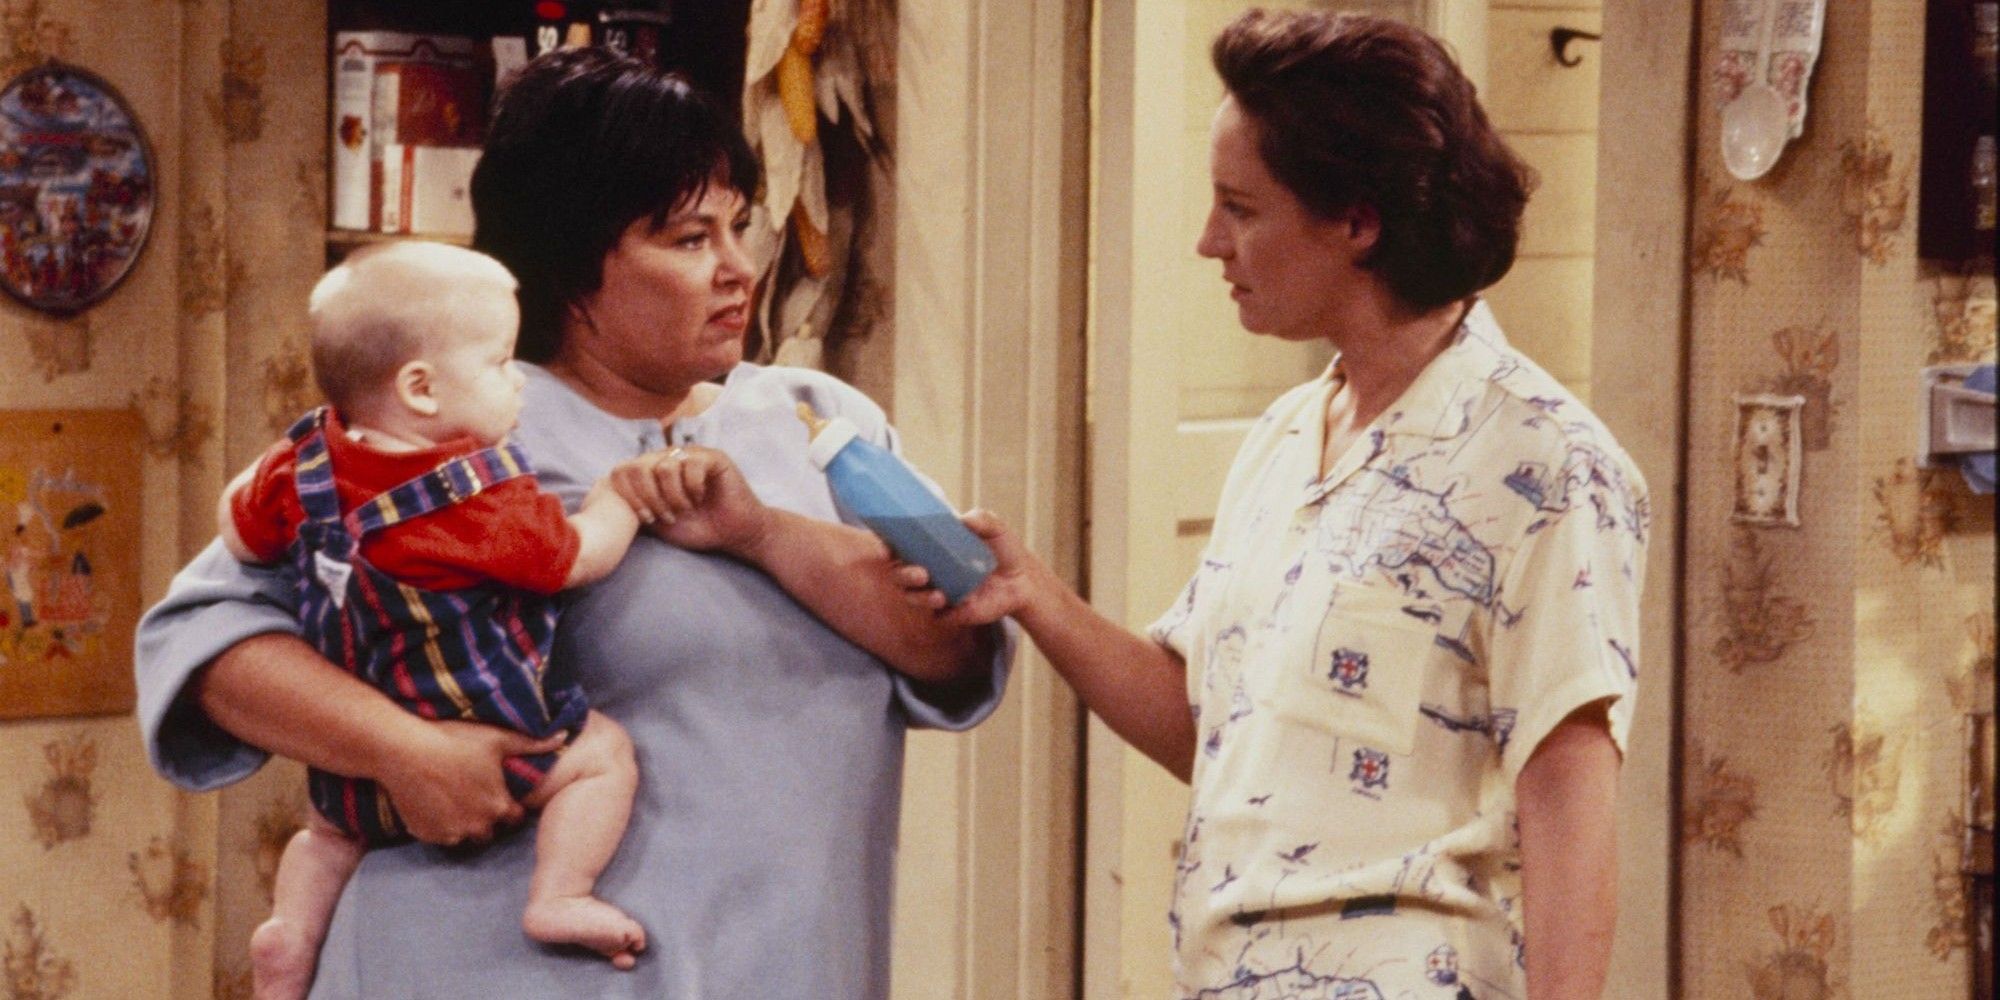 Roseanne Barr with baby in episode of Rosanne